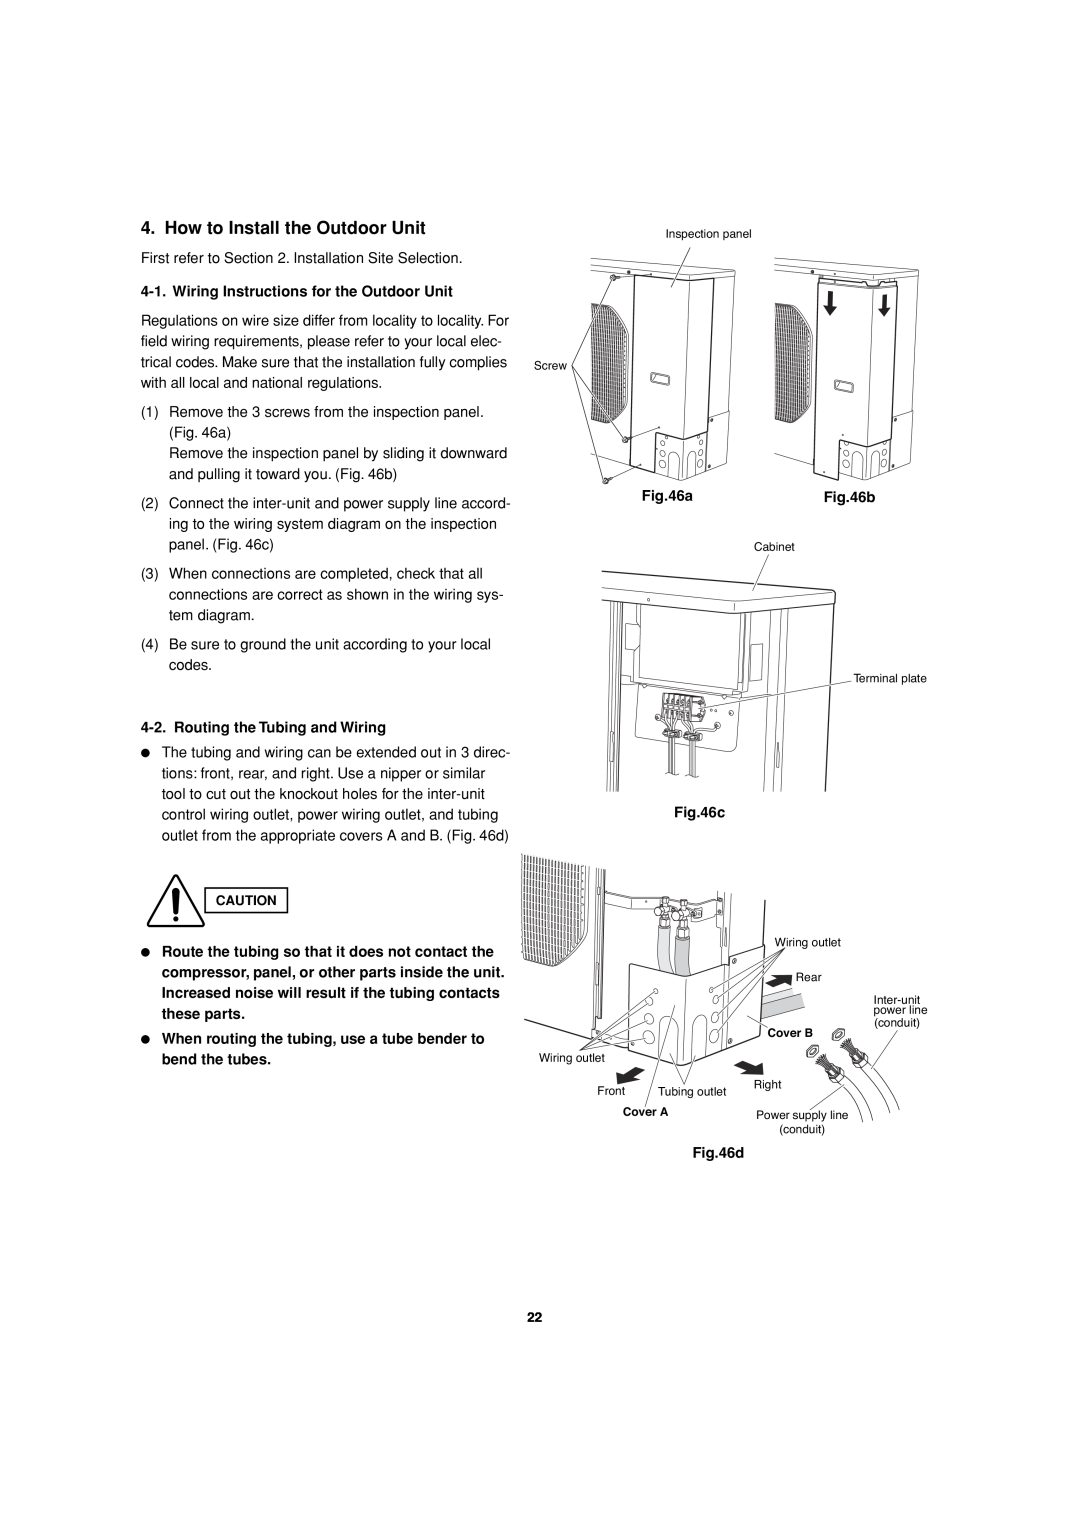 Sanyo C3082 How to Install the Outdoor Unit, Wiring Instructions for the Outdoor Unit, Routing the Tubing and Wiring 